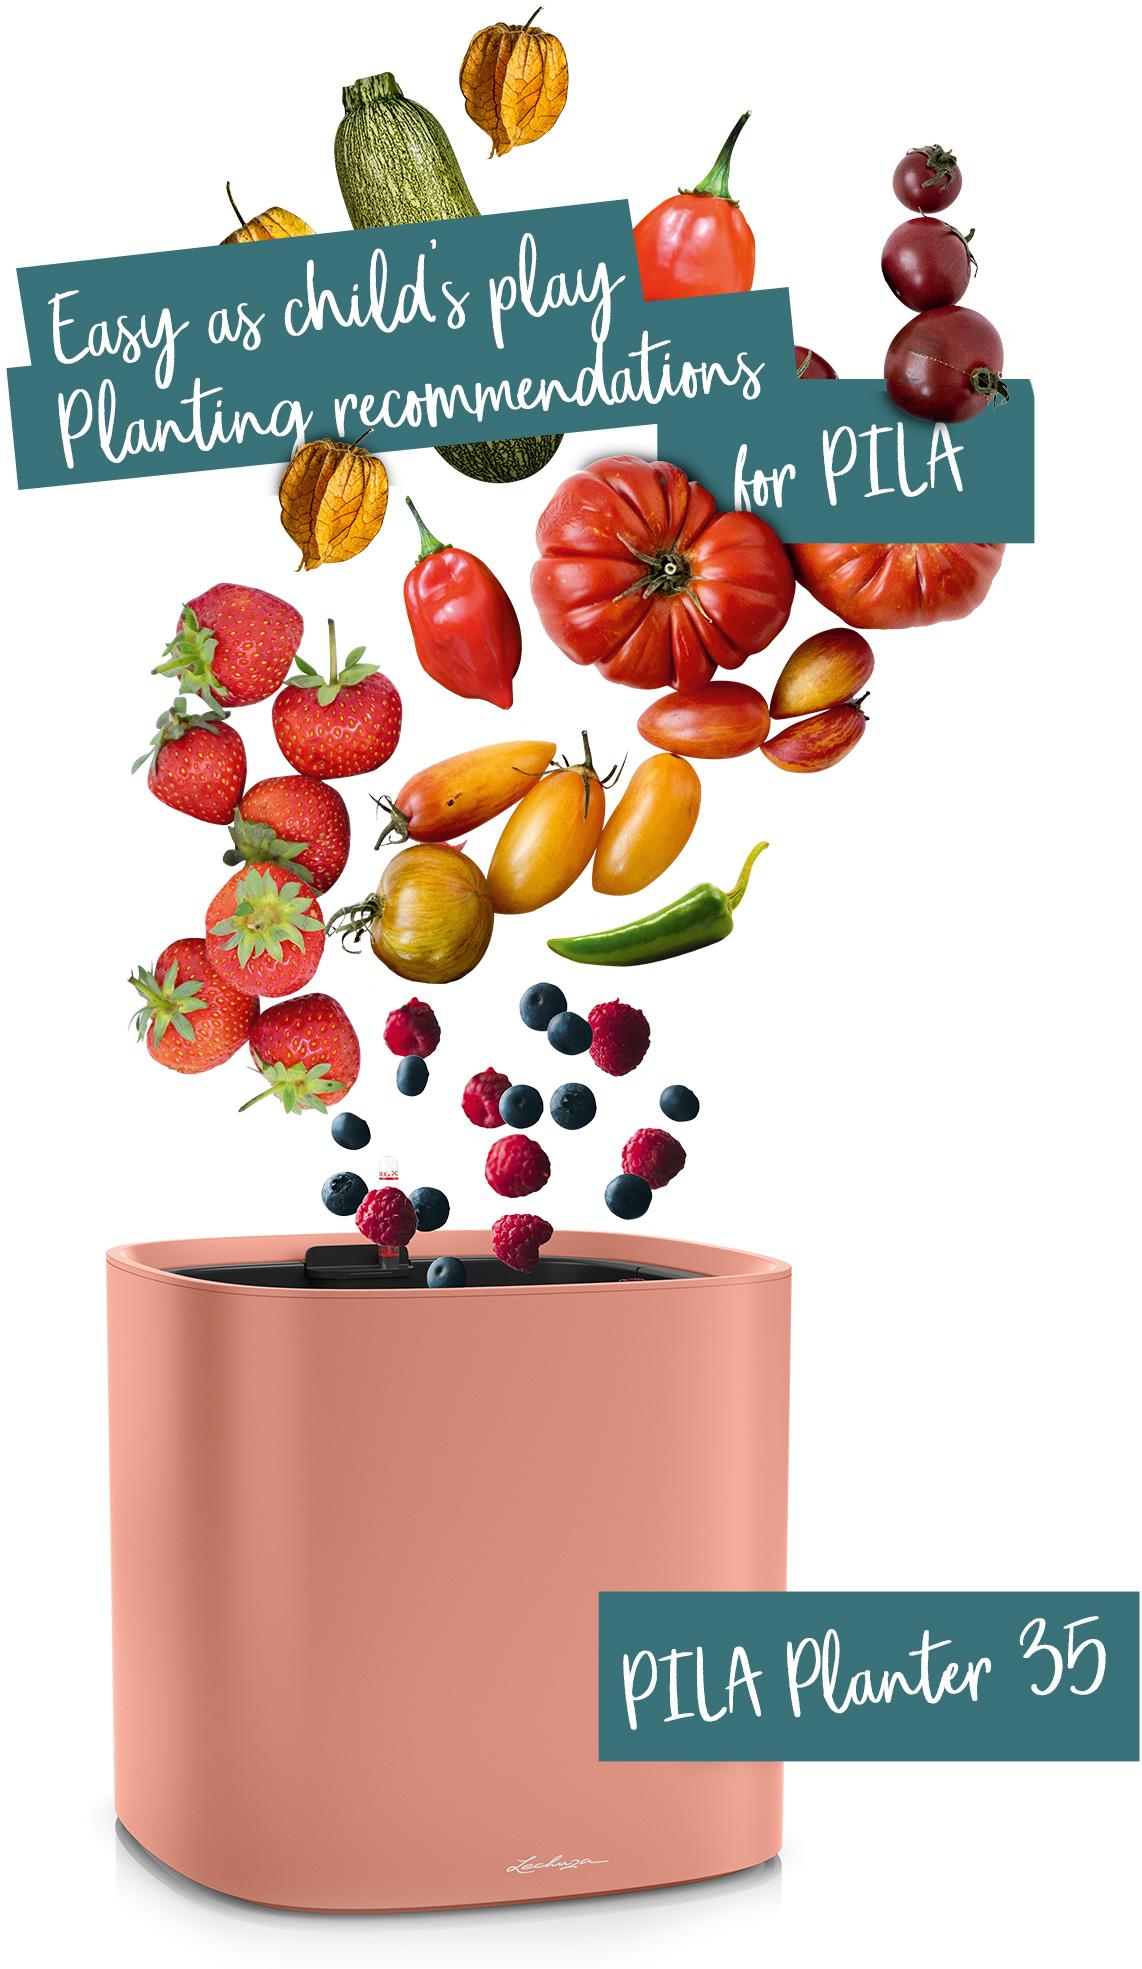 PILA Planter 35 recommended for fruit and vegetables